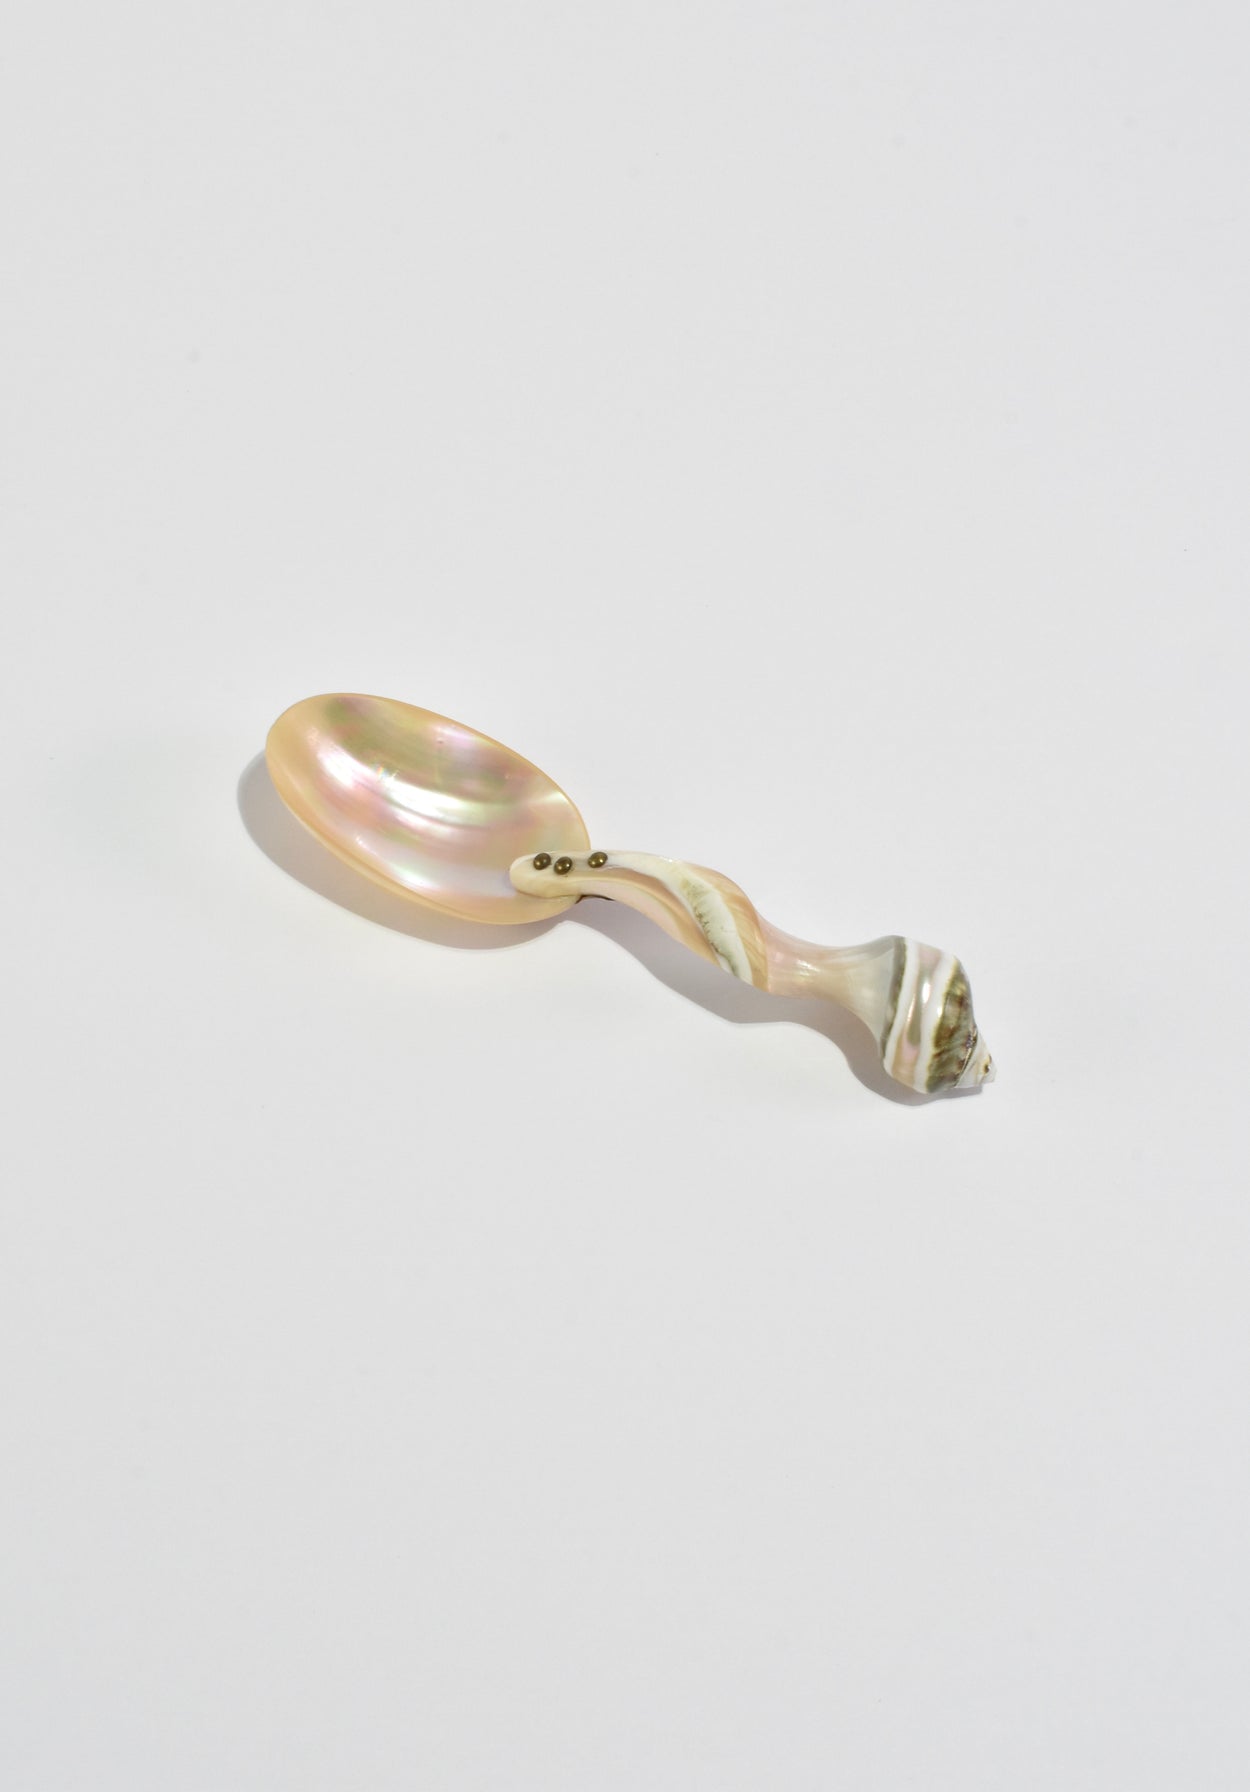 Carved Shell Spoon